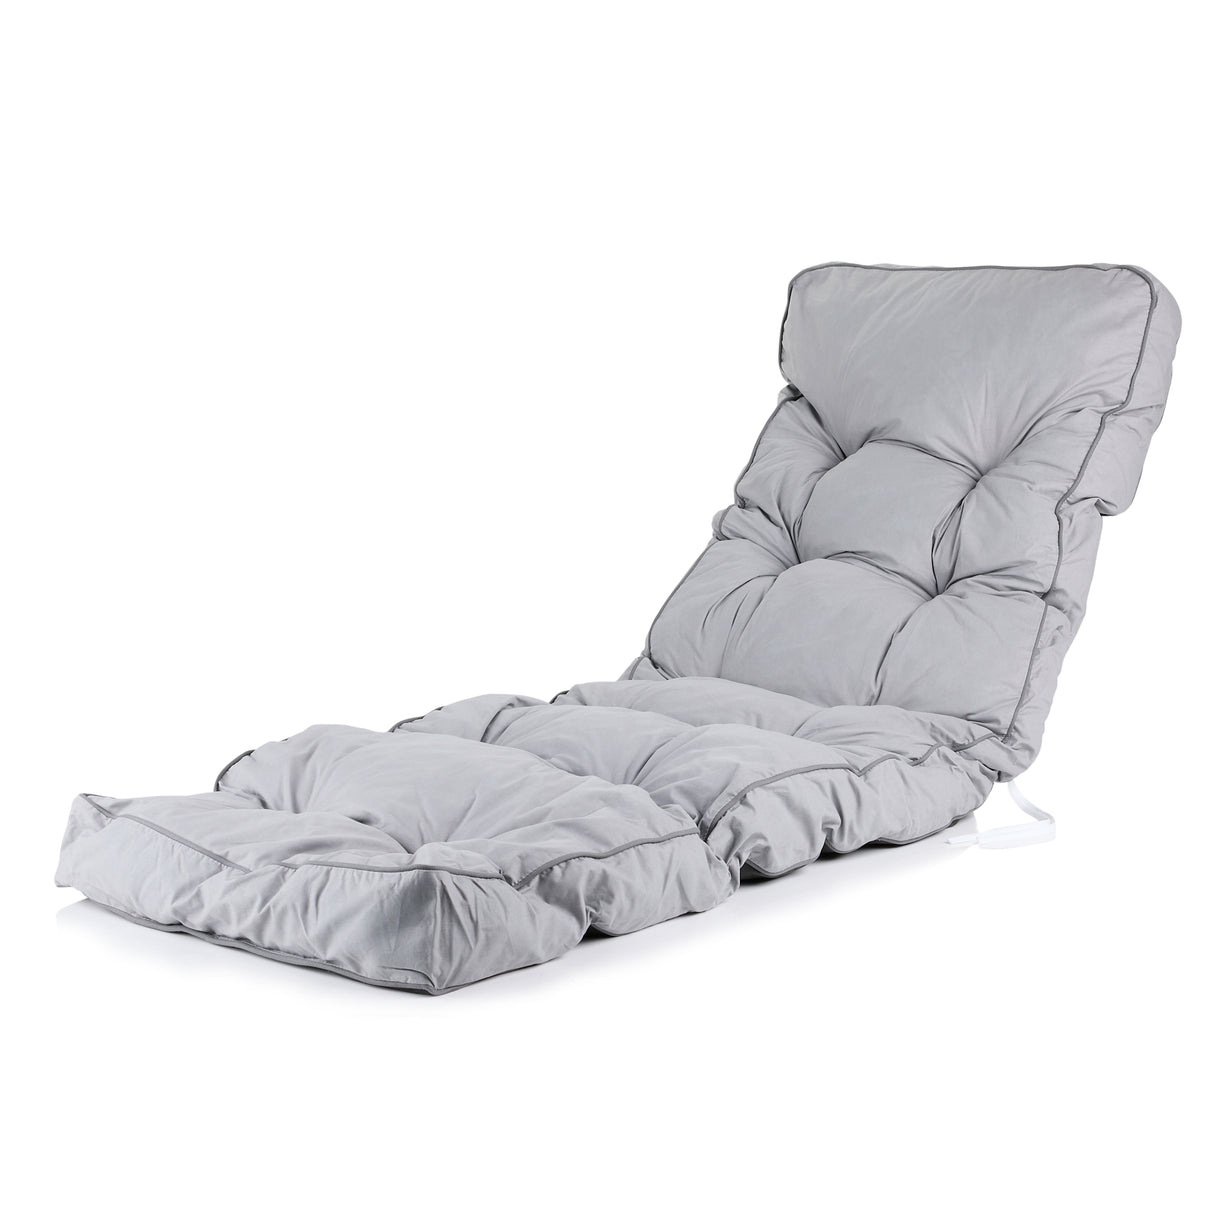 Alfresia Reclining Garden Chair – Charcoal Frame with Classic Cushion, Relaxer Style